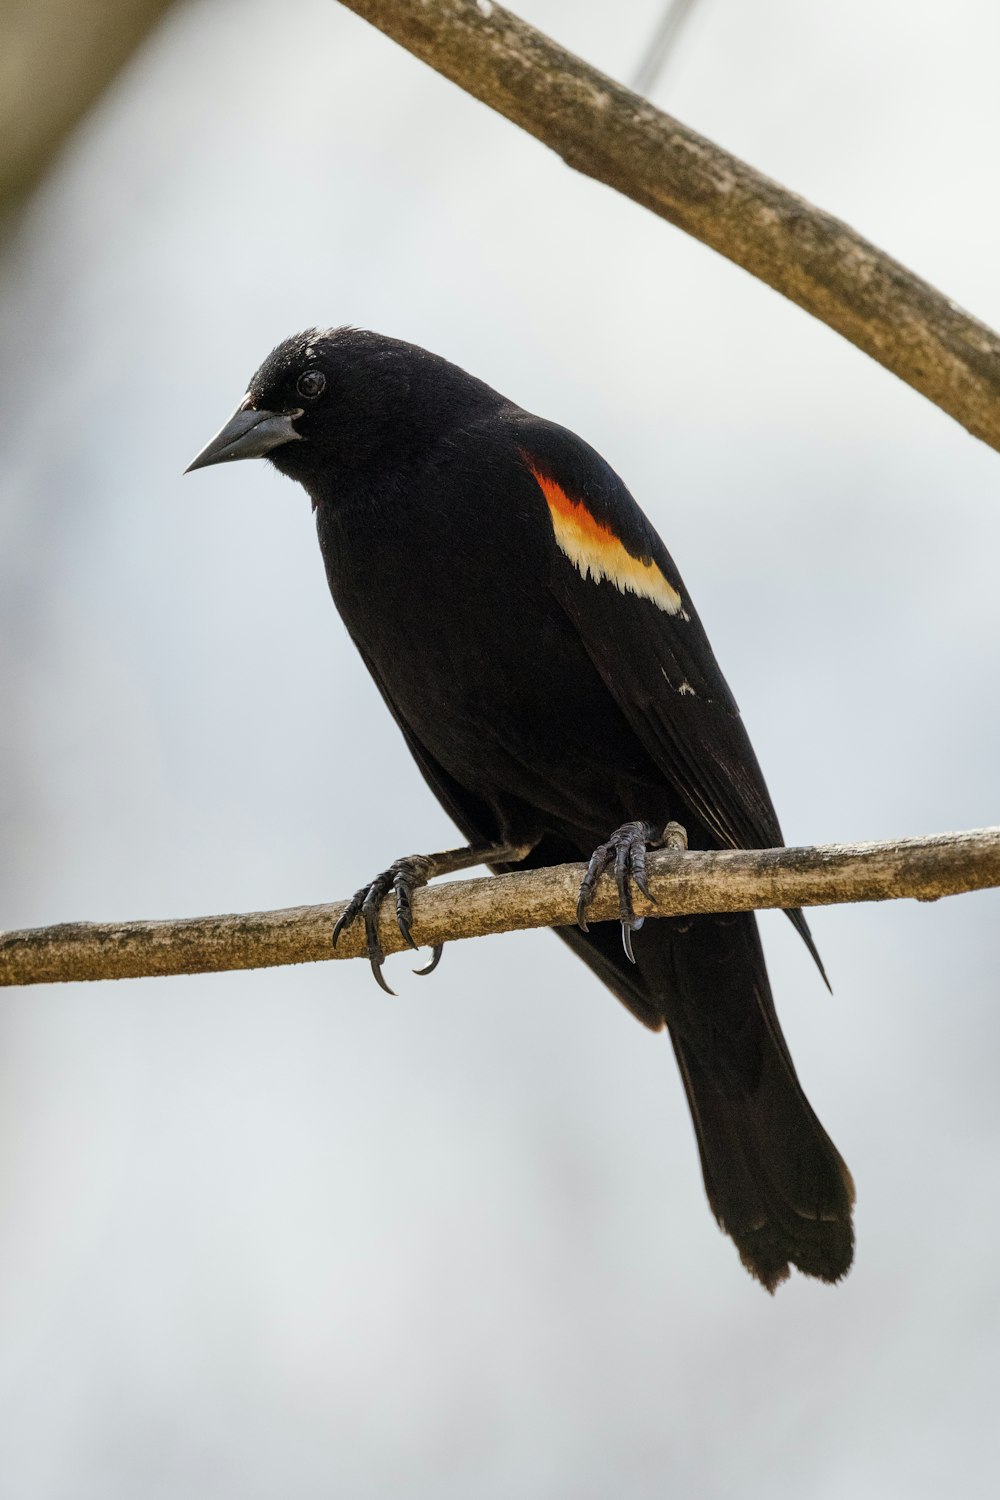 black and brown bird on brown tree branch